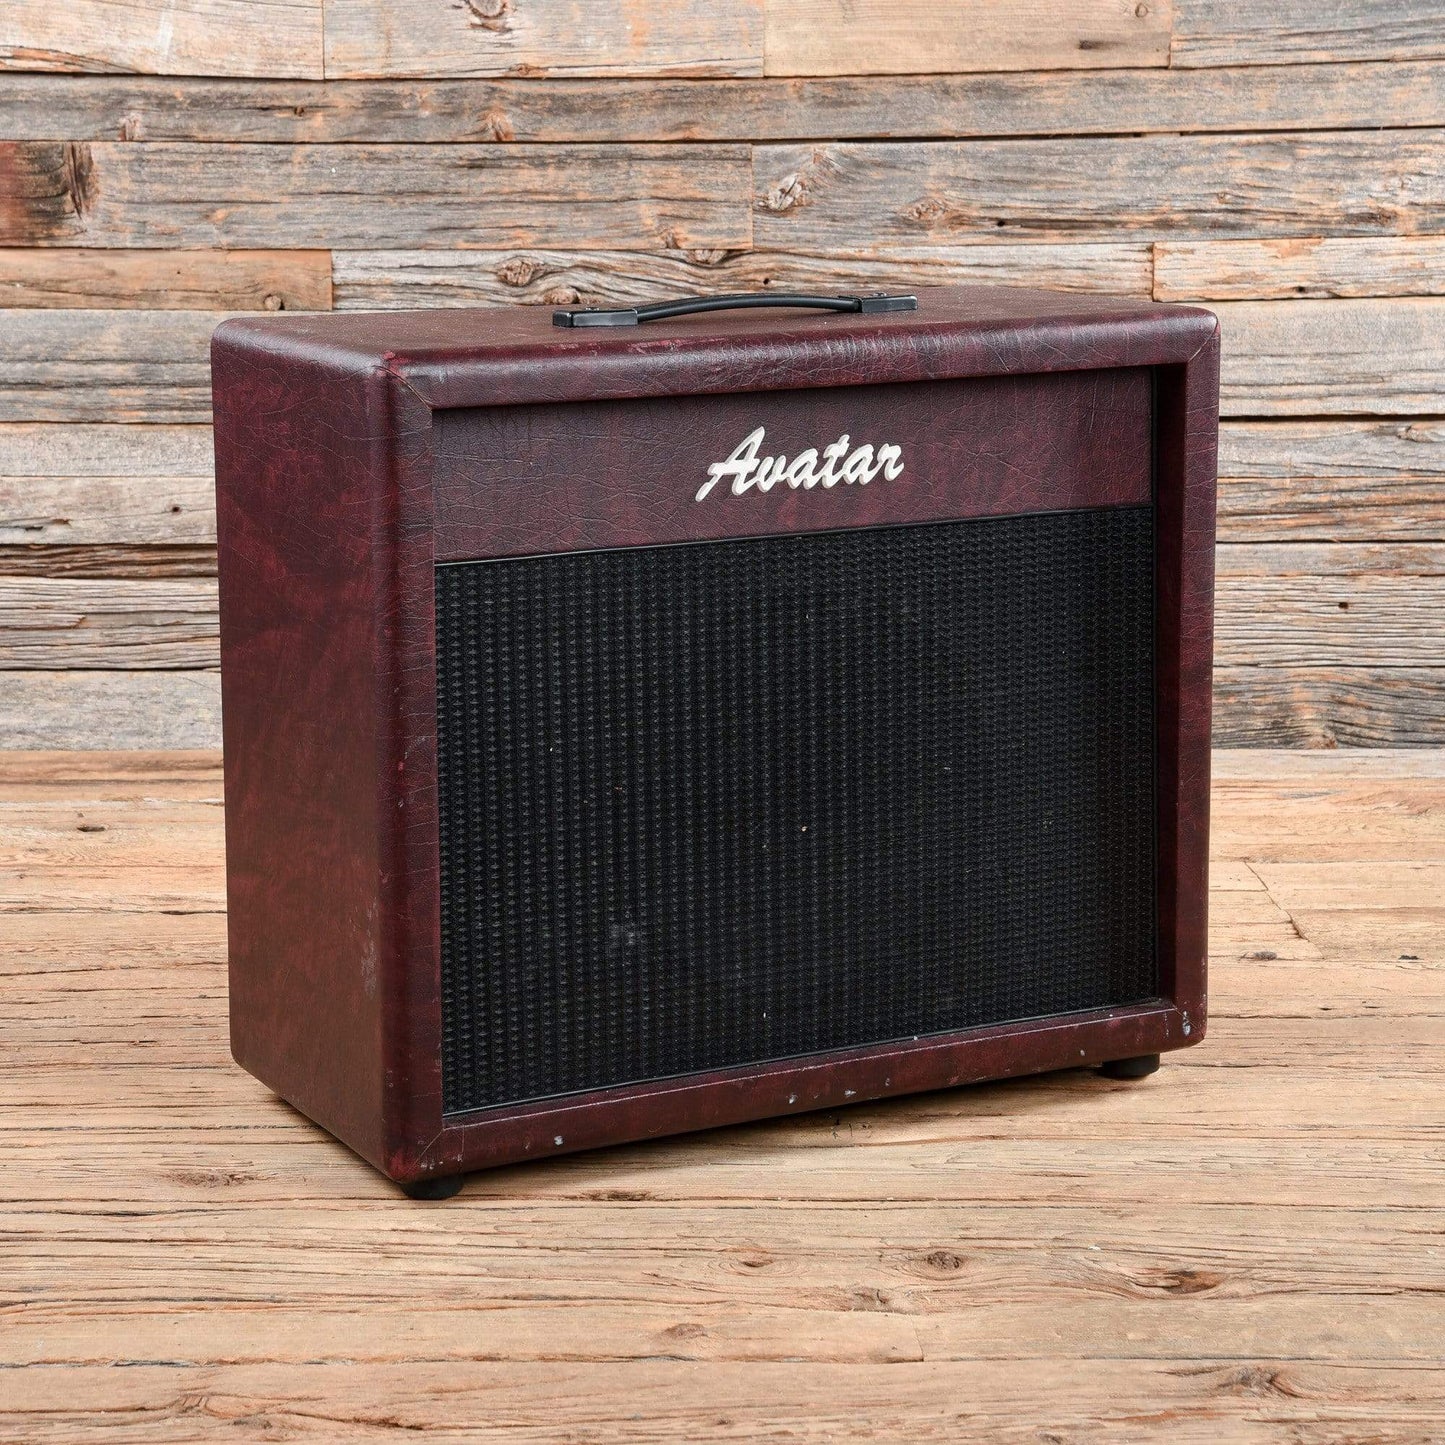 Avatar 1x12 Cabinet Amps / Guitar Cabinets